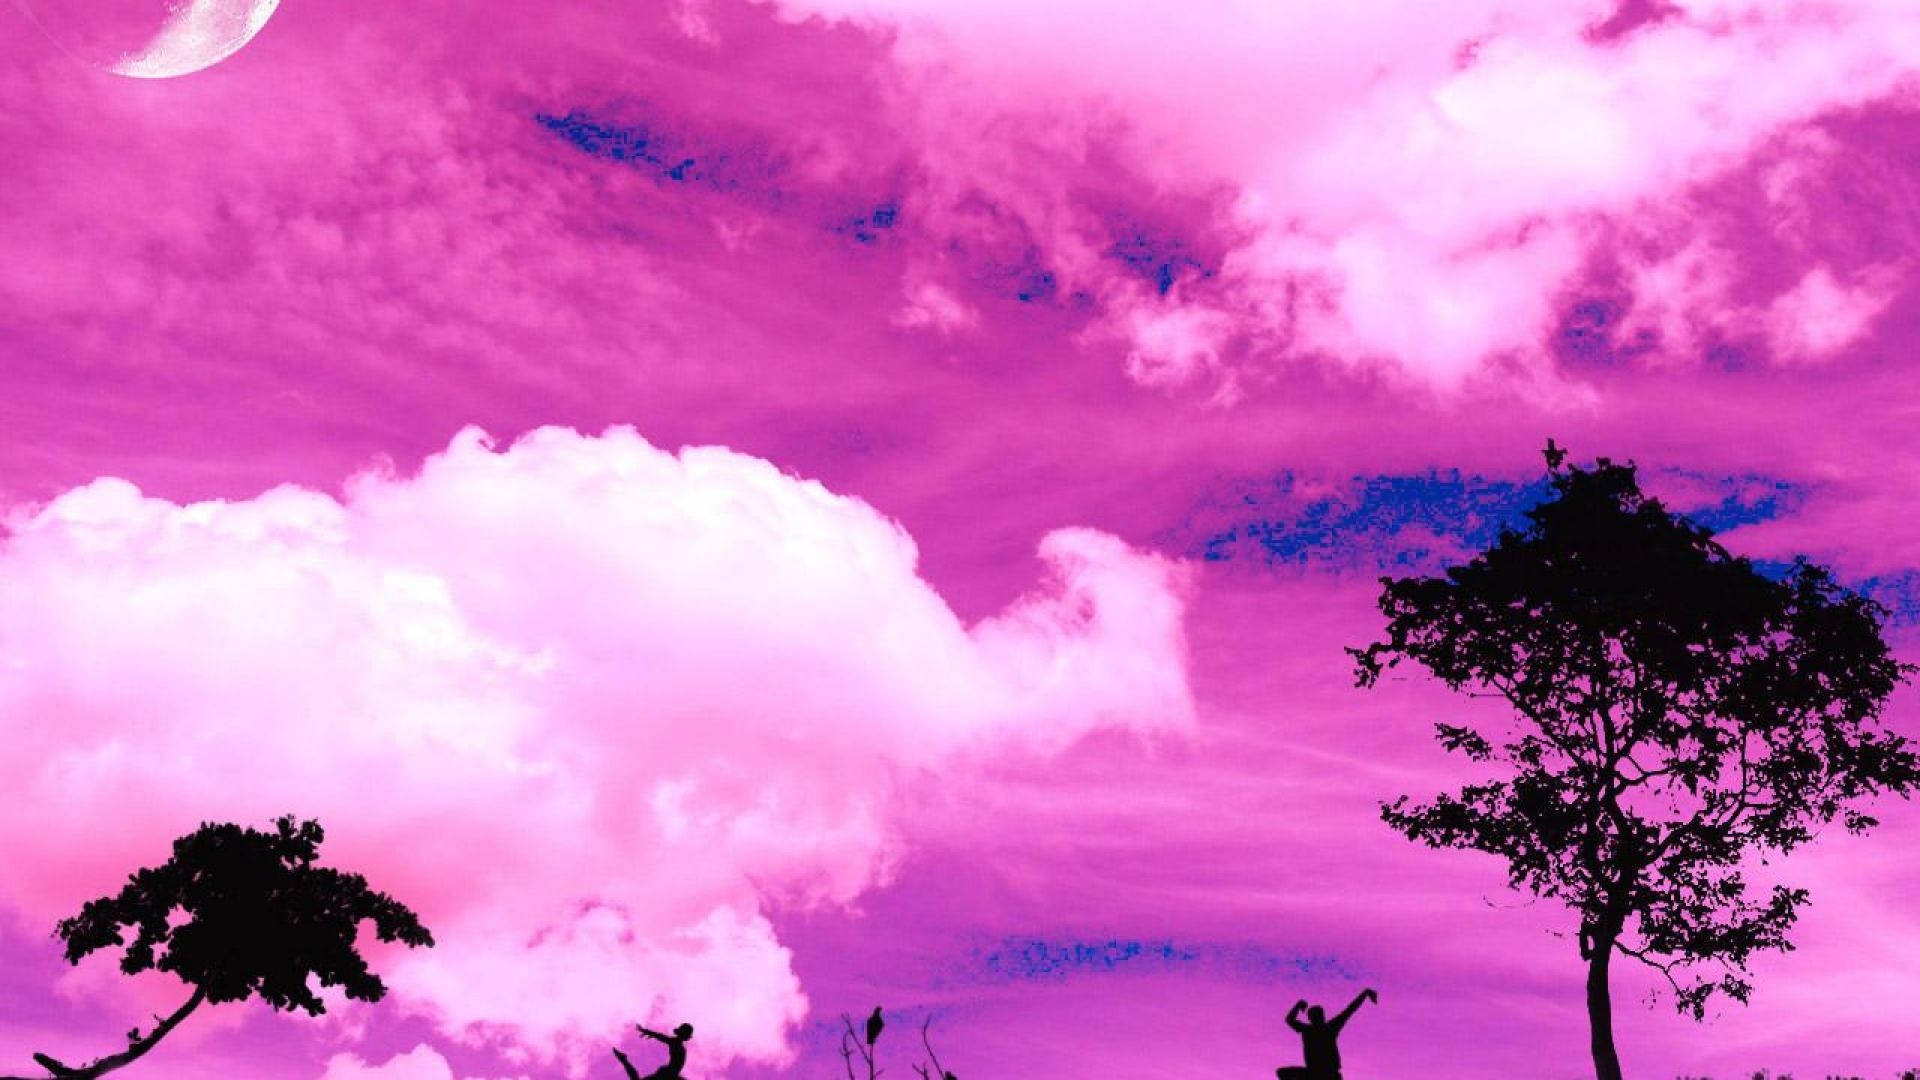 Pink Aesthetic Tumblr Laptop With Sky